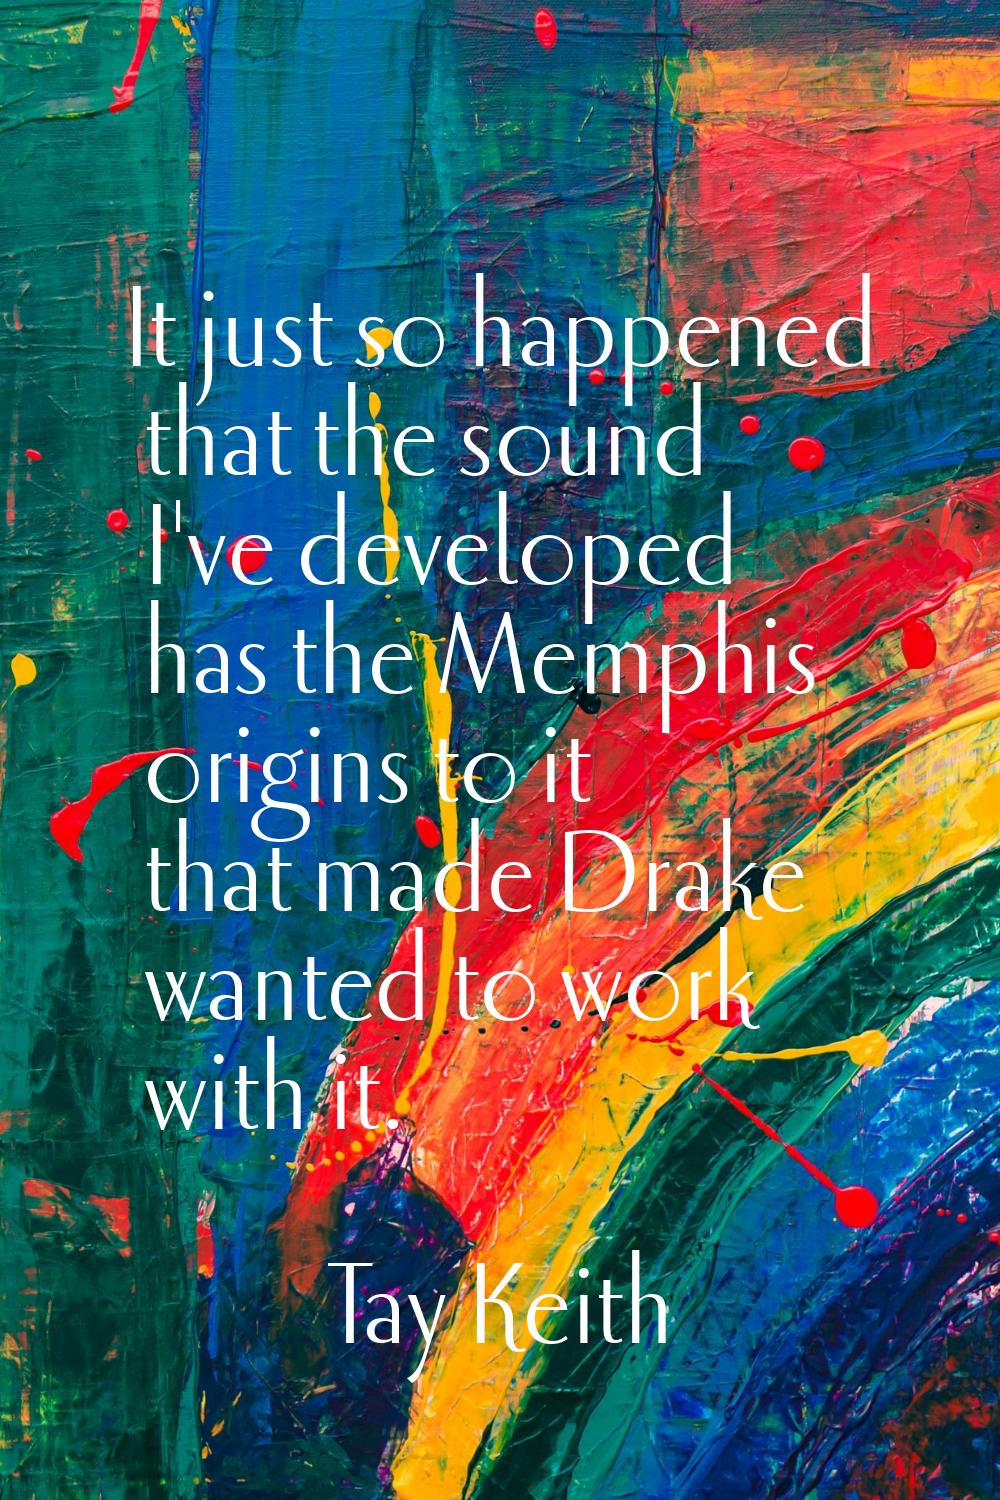 It just so happened that the sound I've developed has the Memphis origins to it that made Drake wan